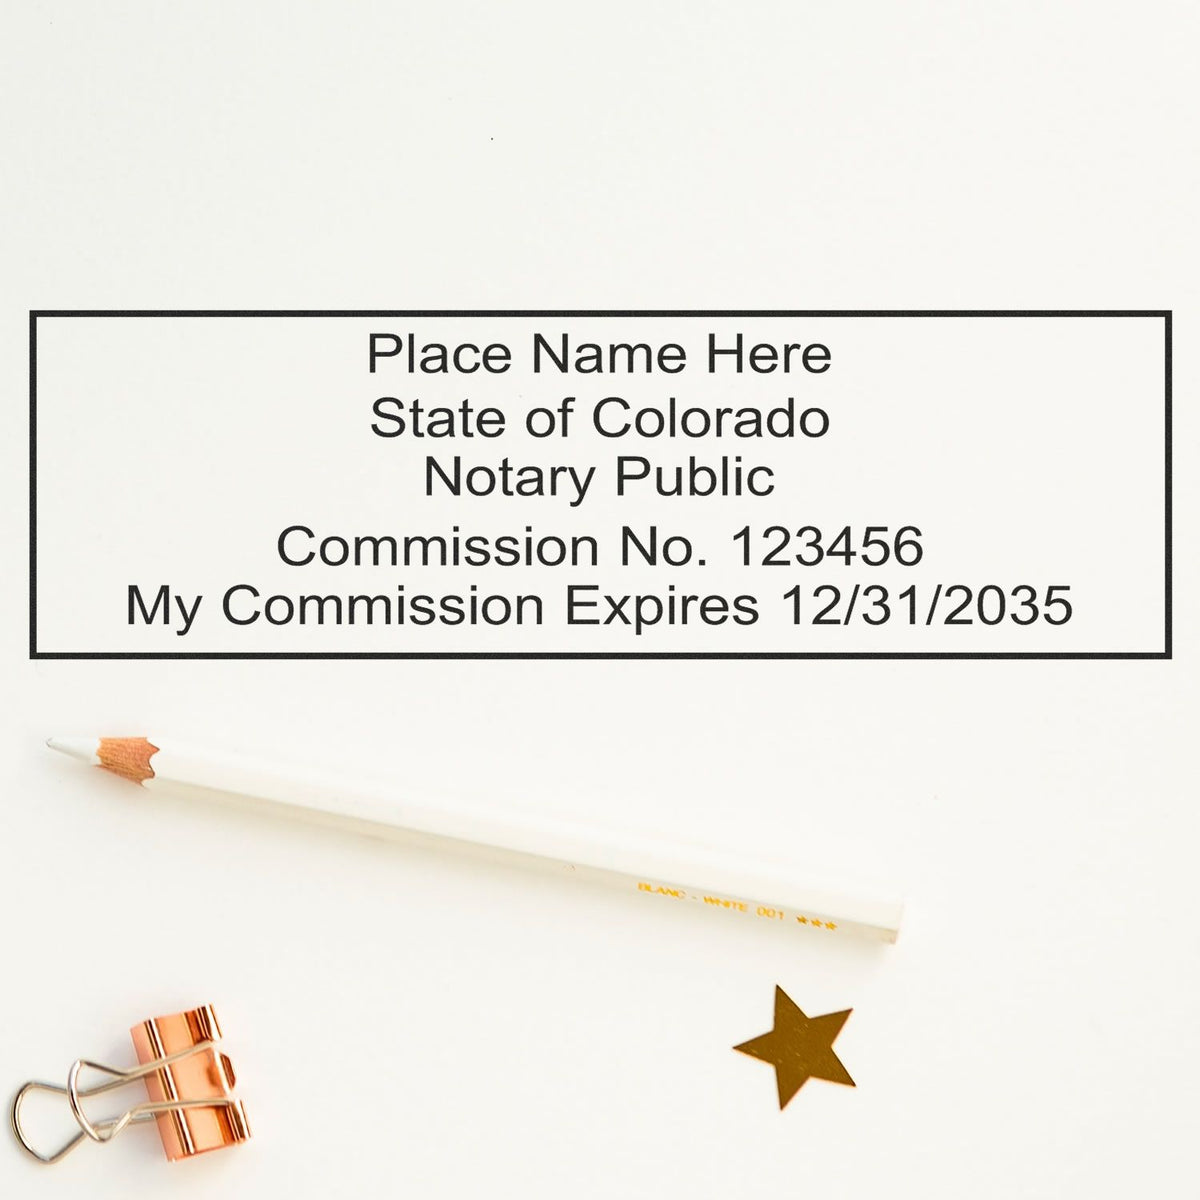 The Super Slim Colorado Notary Public Stamp stamp impression comes to life with a crisp, detailed photo on paper - showcasing true professional quality.